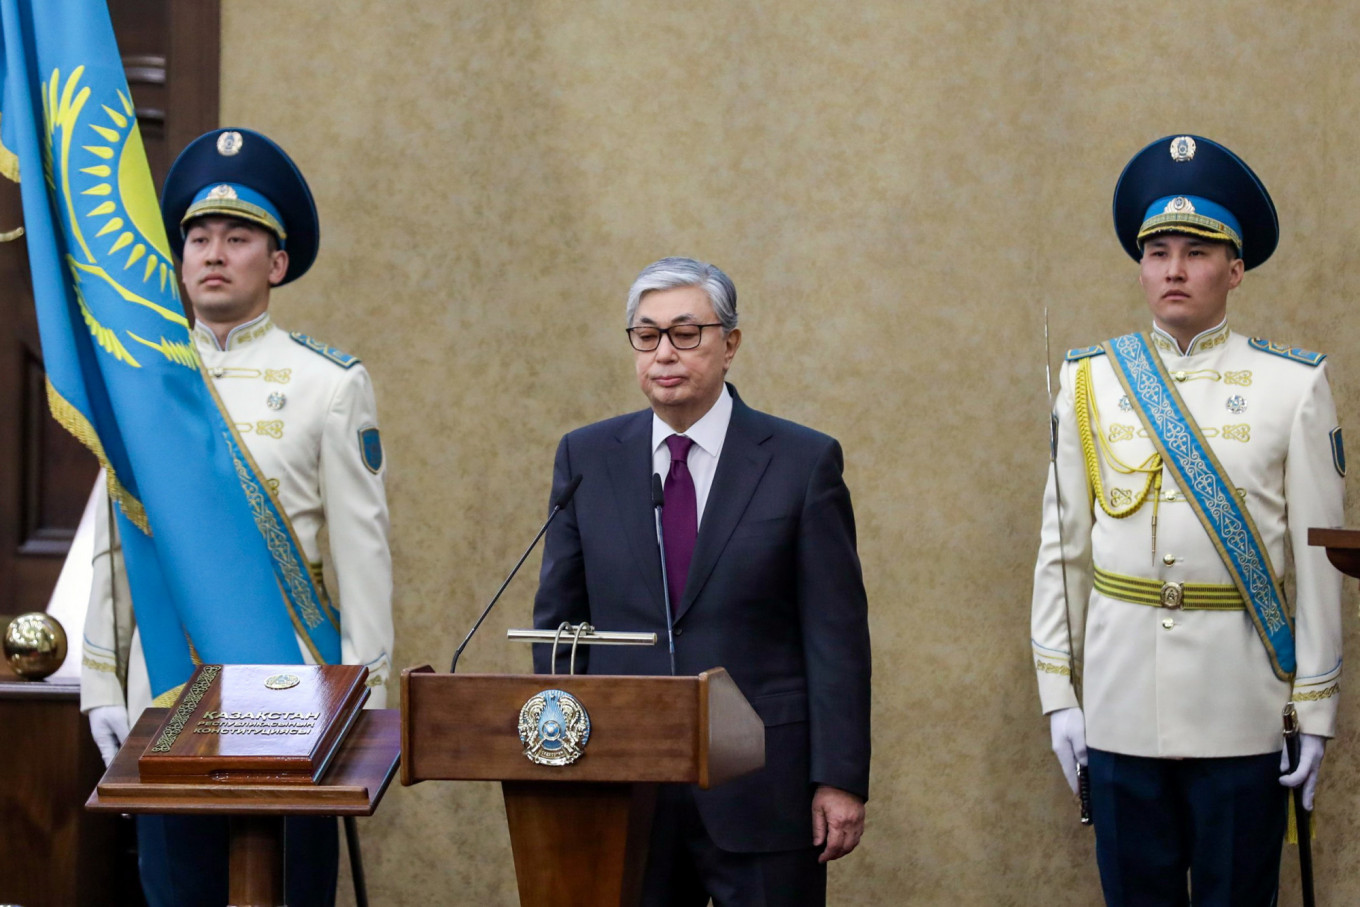 New Kazakh Leader Vows to Keep Friendly Ties With Russia